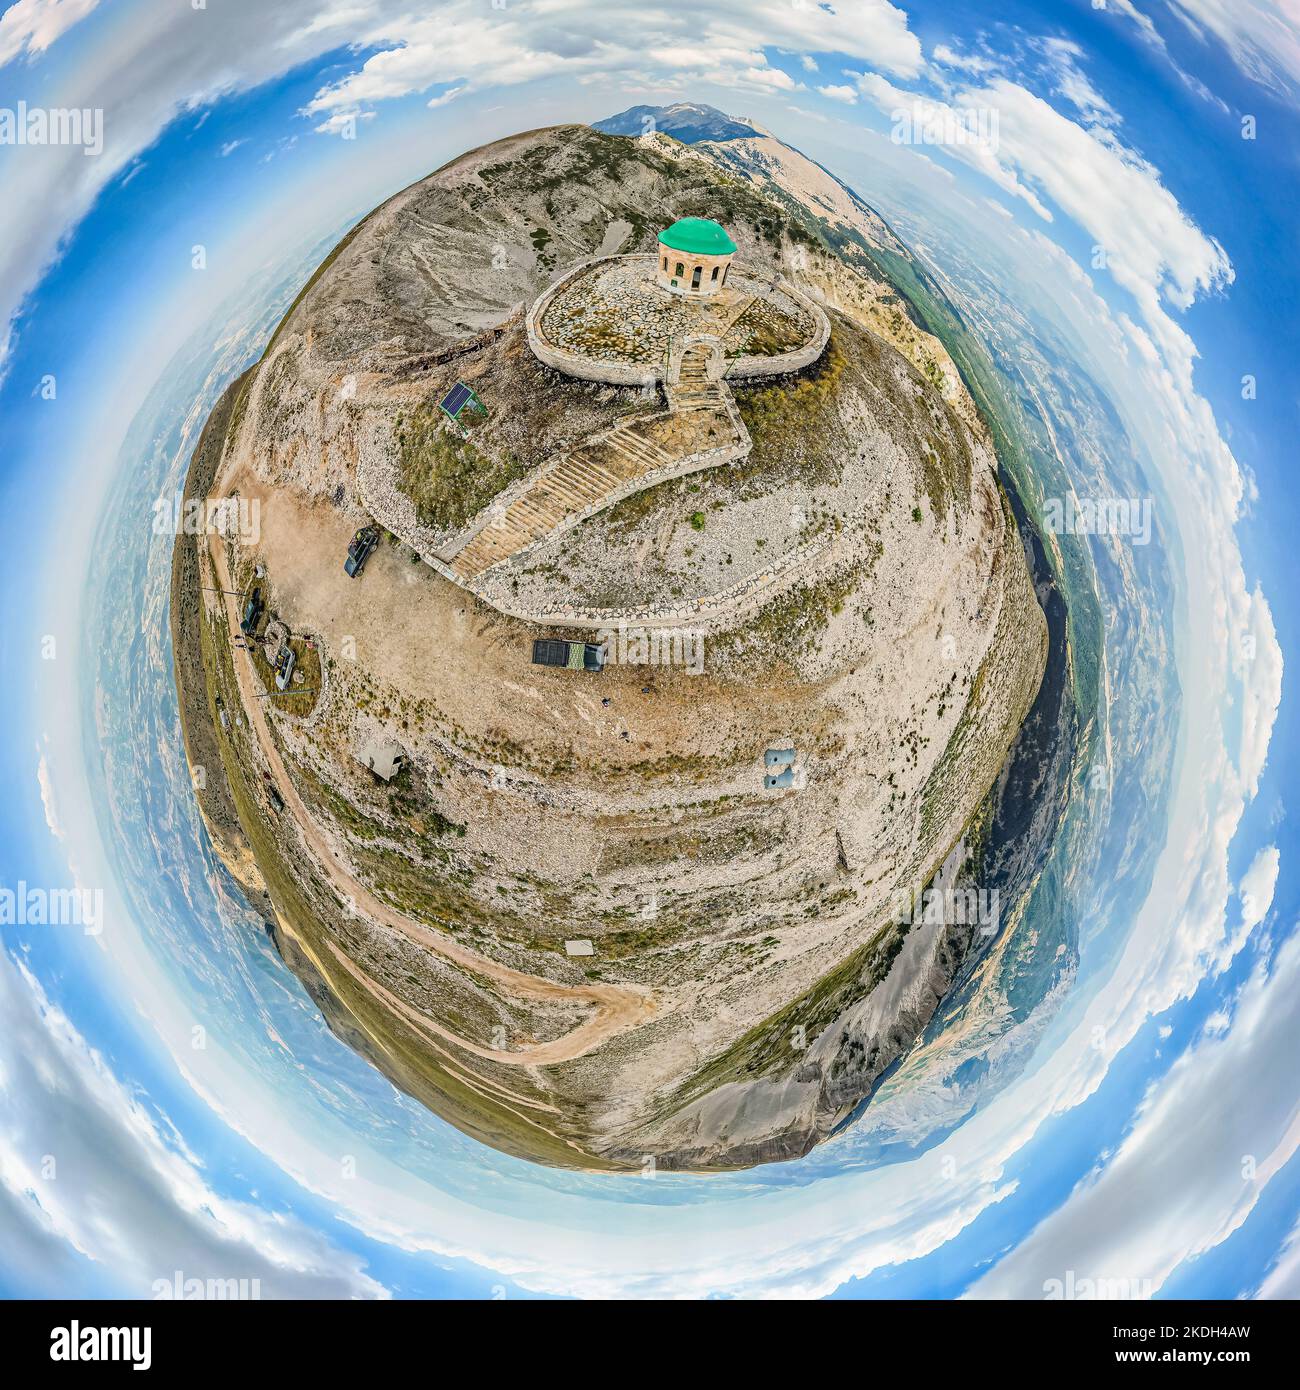 Panoramic planet of Mount Tomorr - is situated within the Tomorr National Park with Shrine (tyrbe) of Abbas ibn Ali on the top - in Summer, Albania Stock Photo